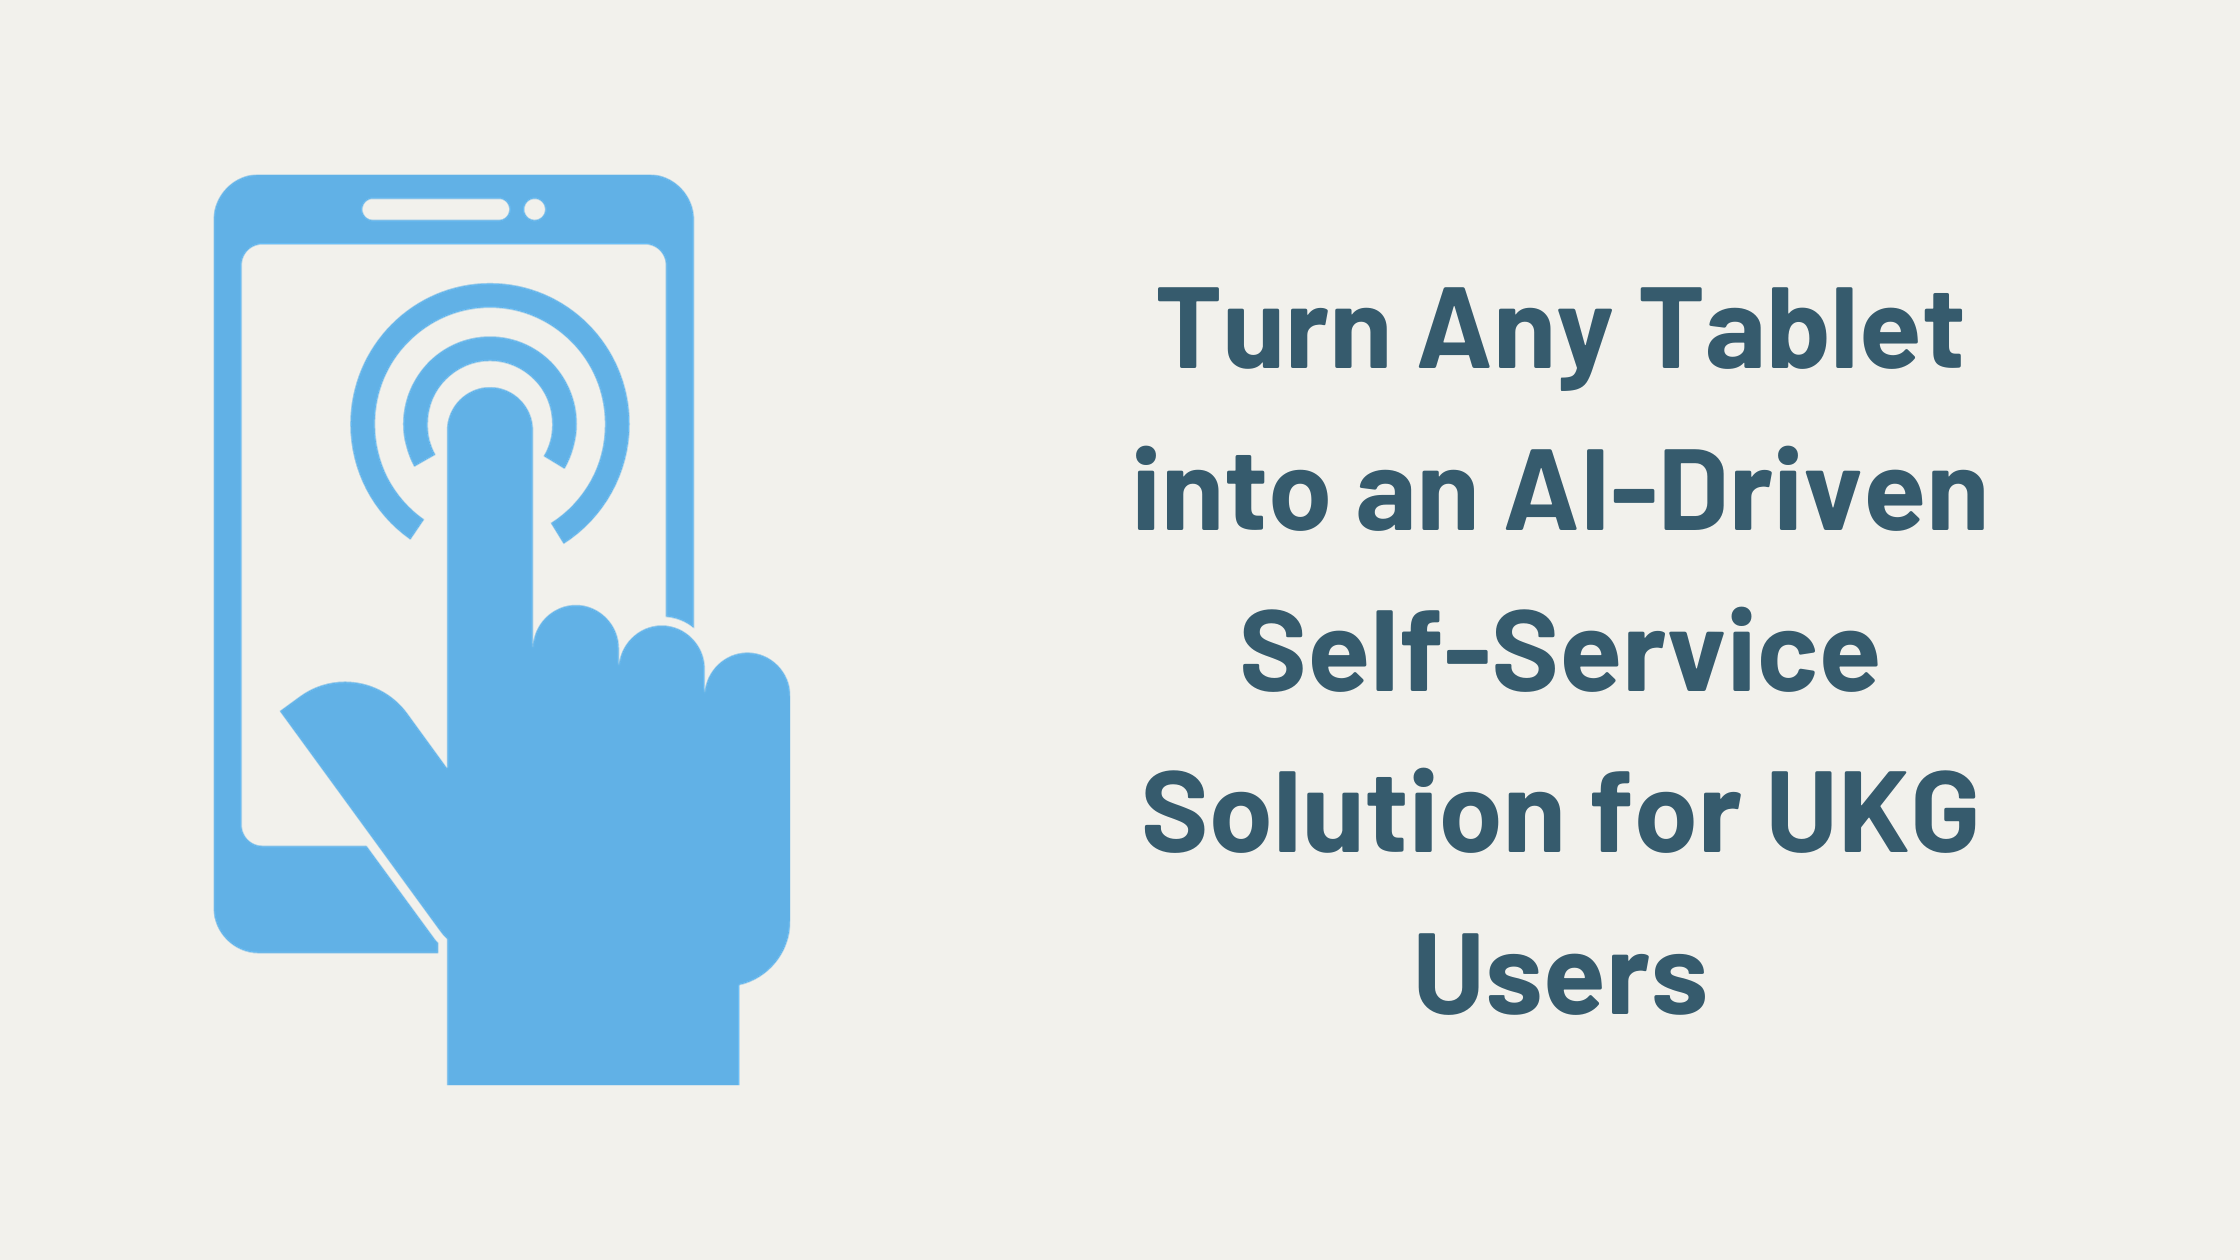 Turn Any Tablet into an AI-Driven Self-Service Solution for UKG Users